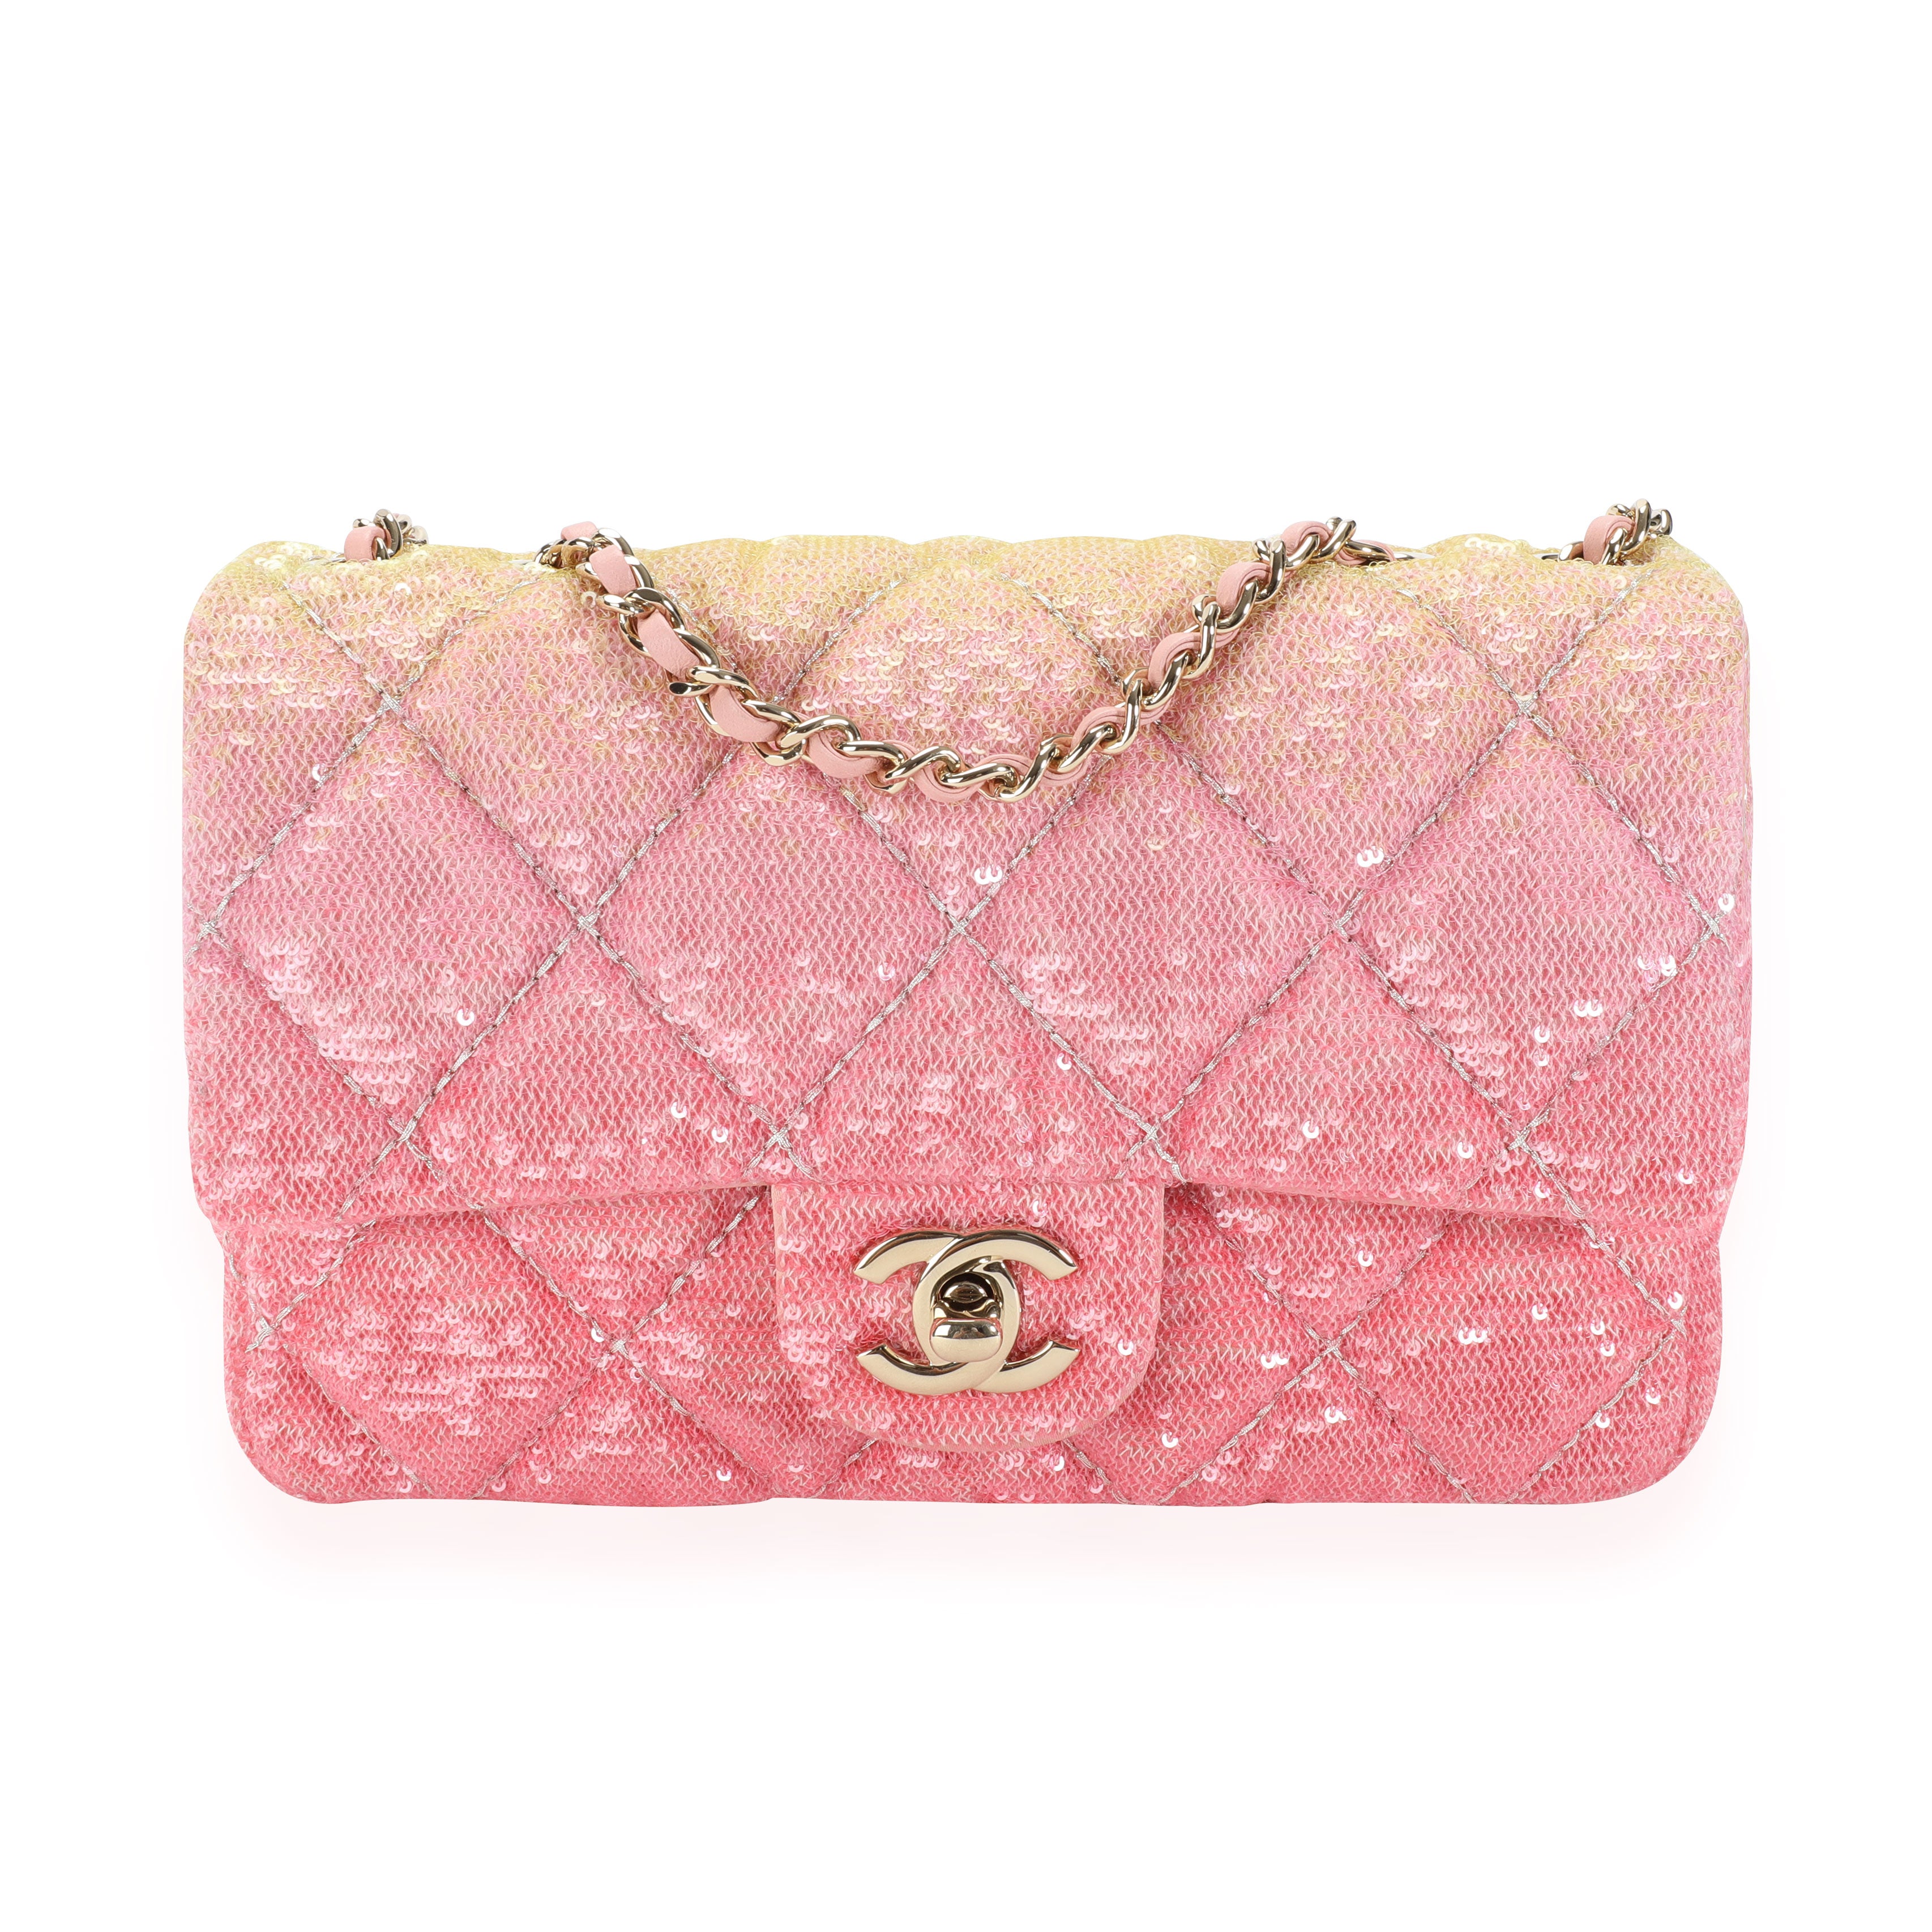 NWT Authentic Chanel Boy Bag Beige Pink Ombré Patent Leather Gold Quilted  Clutch